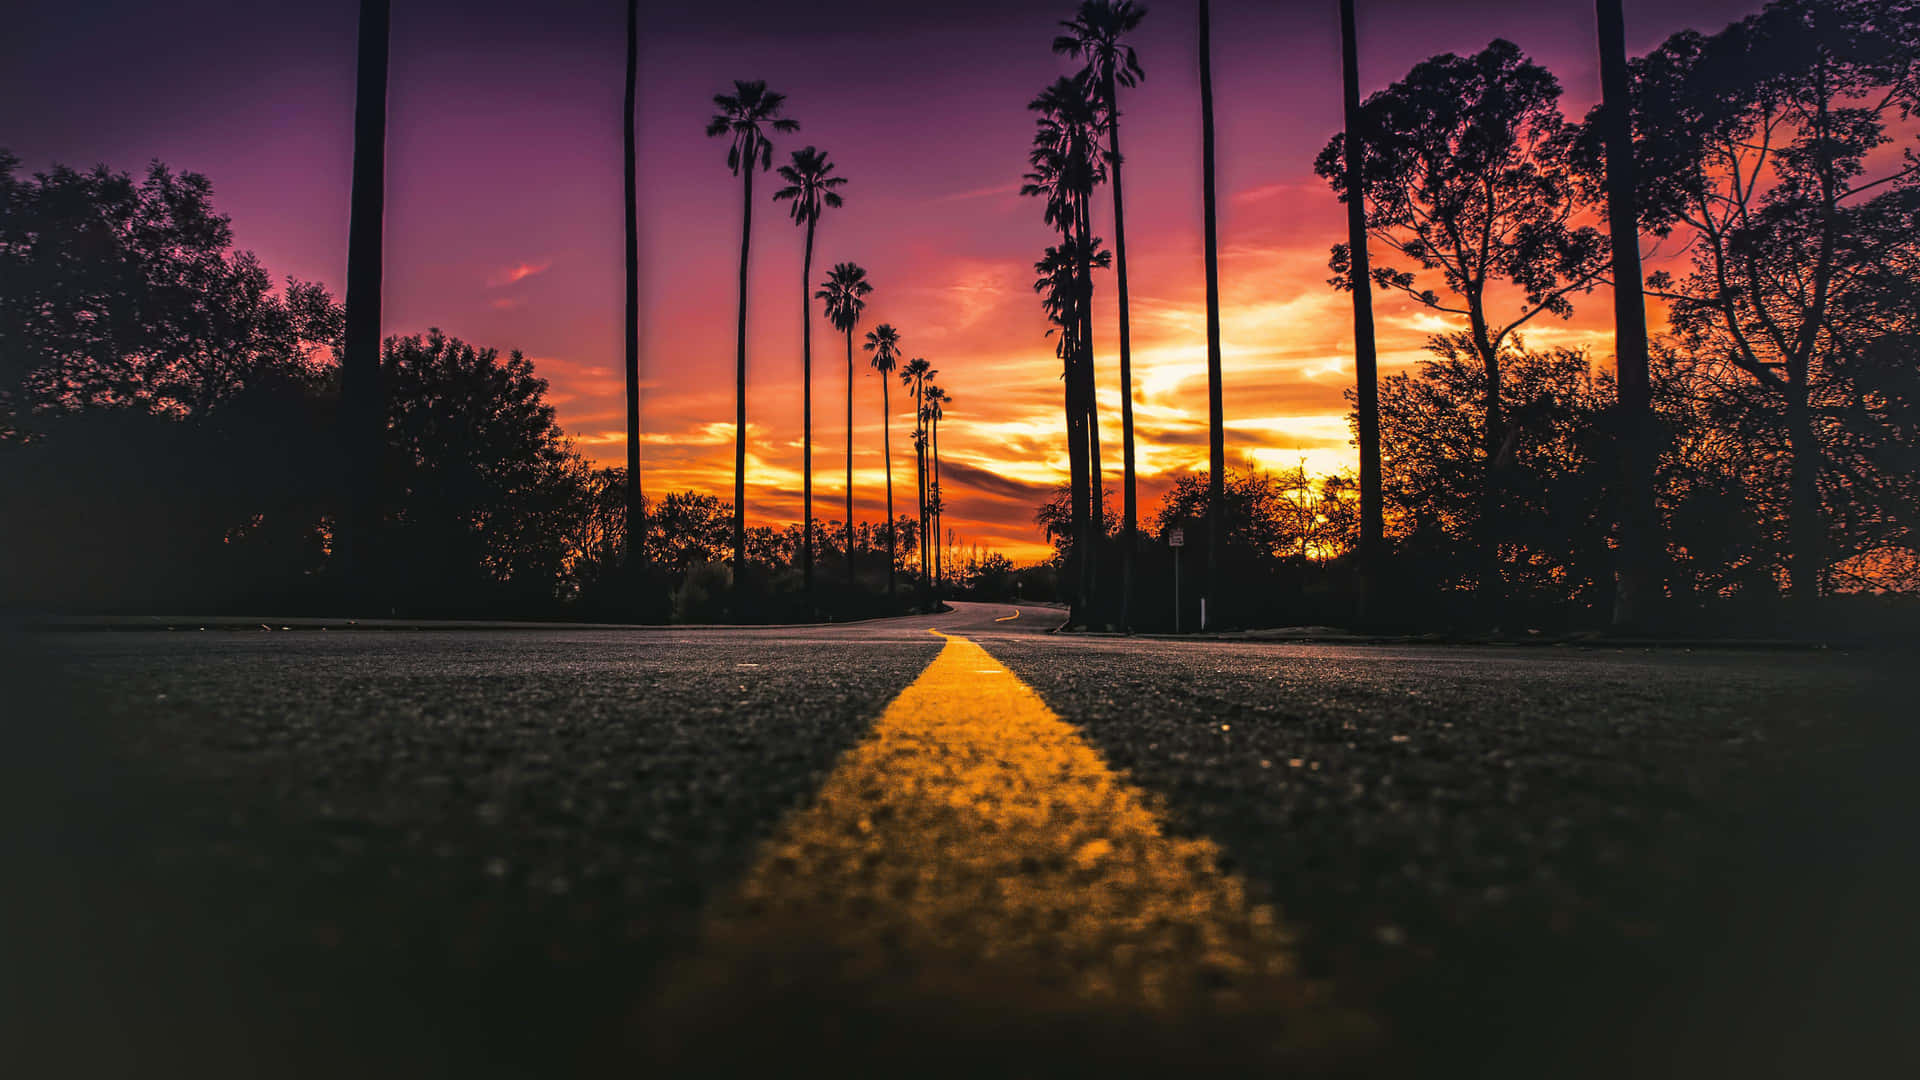 A Road With Palm Trees And A Sunset Wallpaper